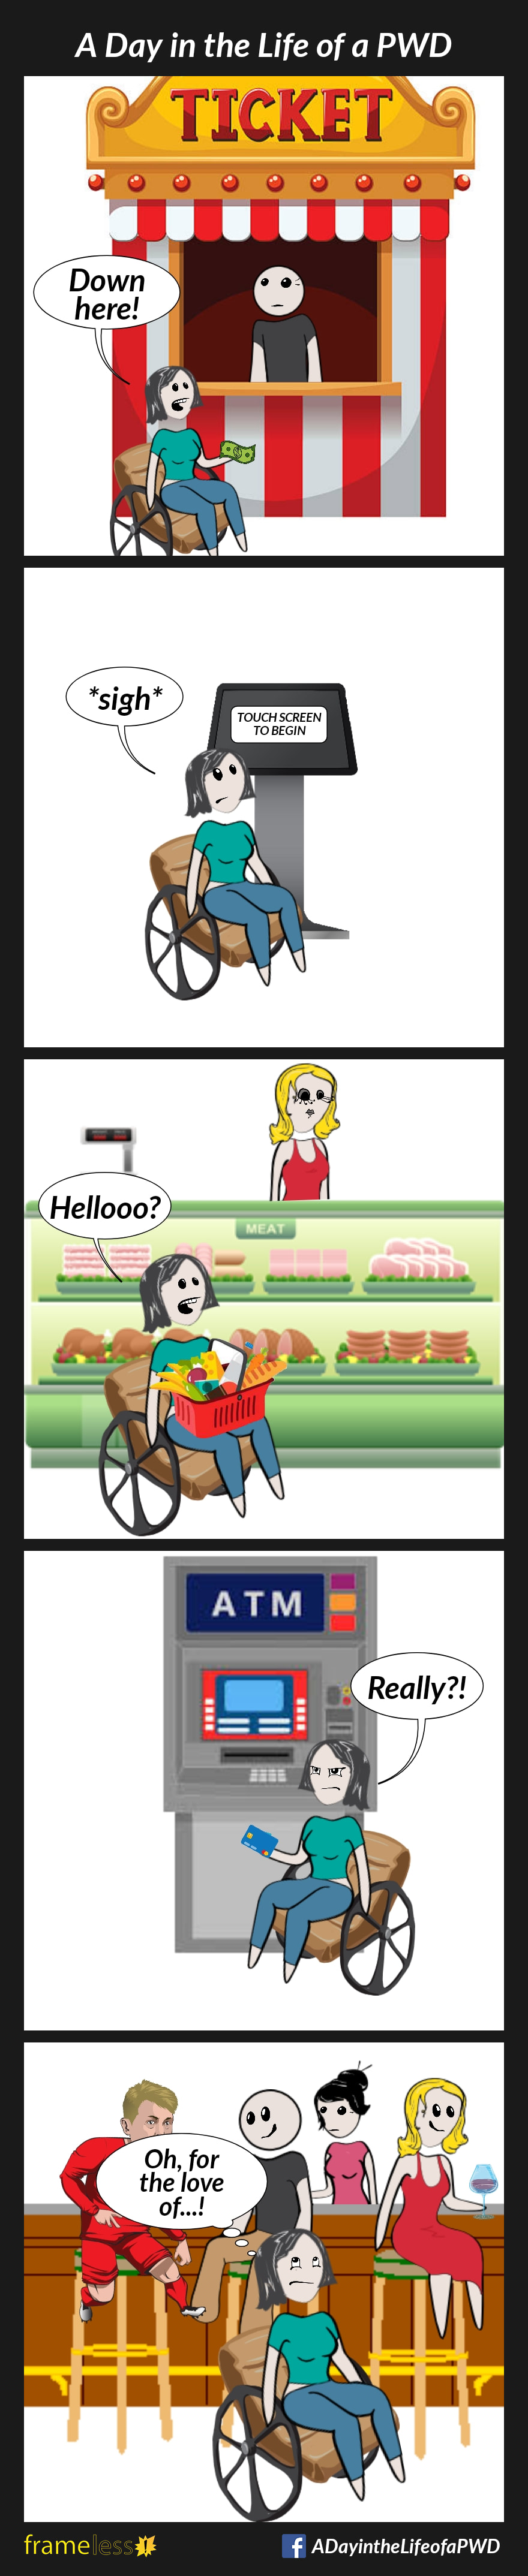 COMIC STRIP
A Day in the Life of a PWD

Frame 1:
A woman in a wheelchair is at a ticket booth. The window is above her head.
WOMAN: Down here!

Frame 2:
The woman is at a mall directory. The touch screen is above her head.
WOMAN: *Sigh*

Frame 3:
The woman is at a deli counter in the grocery store. The counter is above her head.
WOMAN: Hellooo?

Frame 4:
The woman is at an ATM. The keypad is above her head.
WOMAN: Really?!

Frame 5:
The woman is in a pub. The bar is above her head, and people on bar stools are blocking access.
WOMAN: Oh, for the love of--!